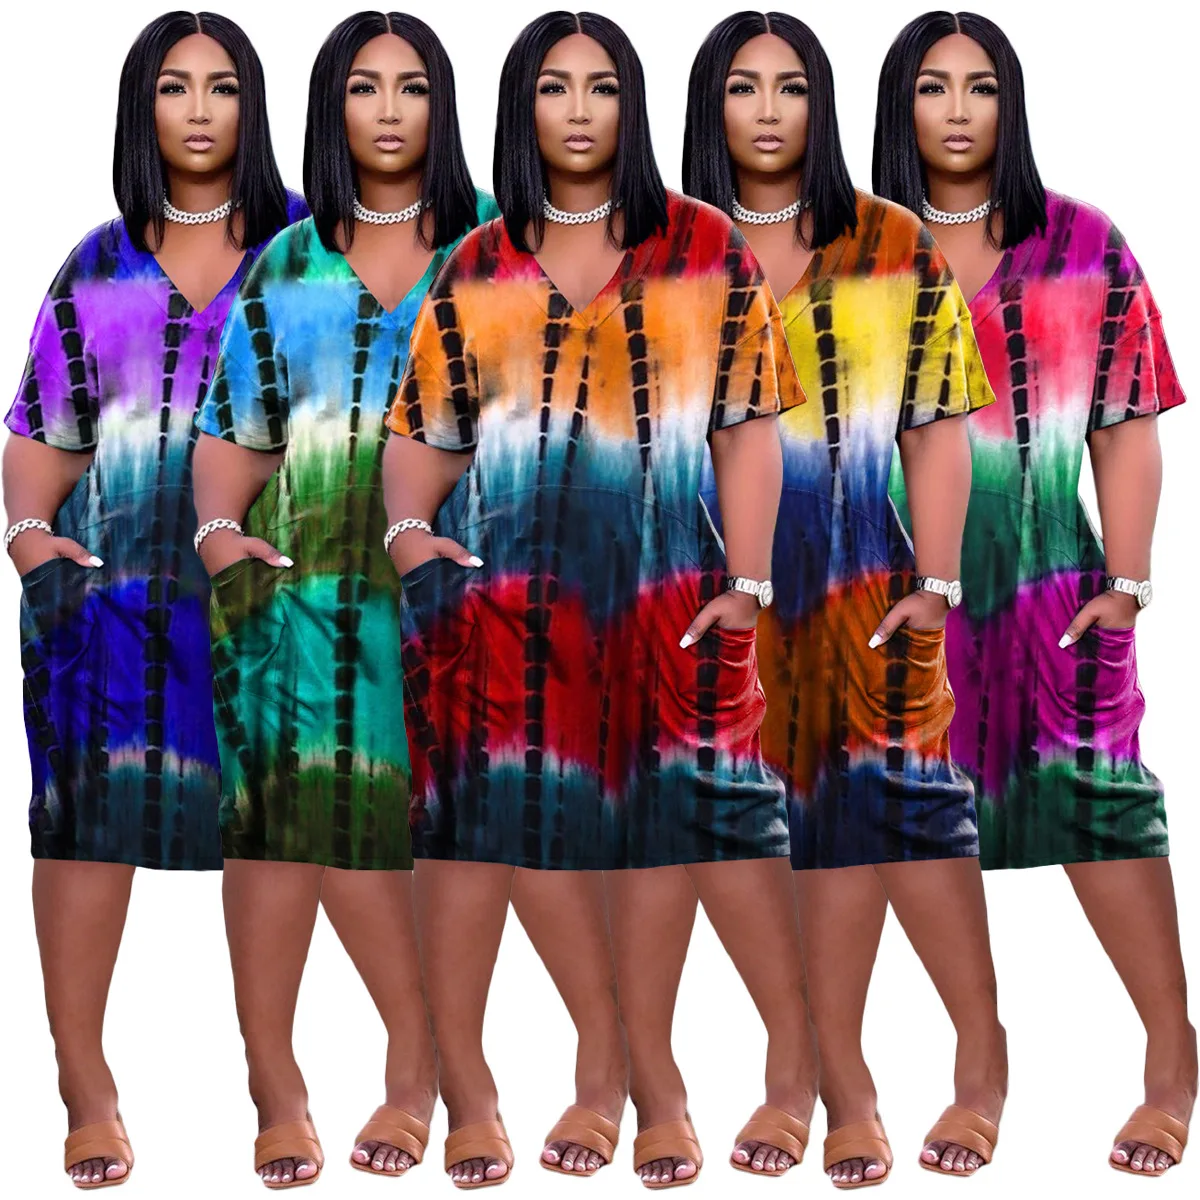 

plus size women's dresses suits set for women 2021 sexy nepal bright elegant fitted good multicolours club dresses